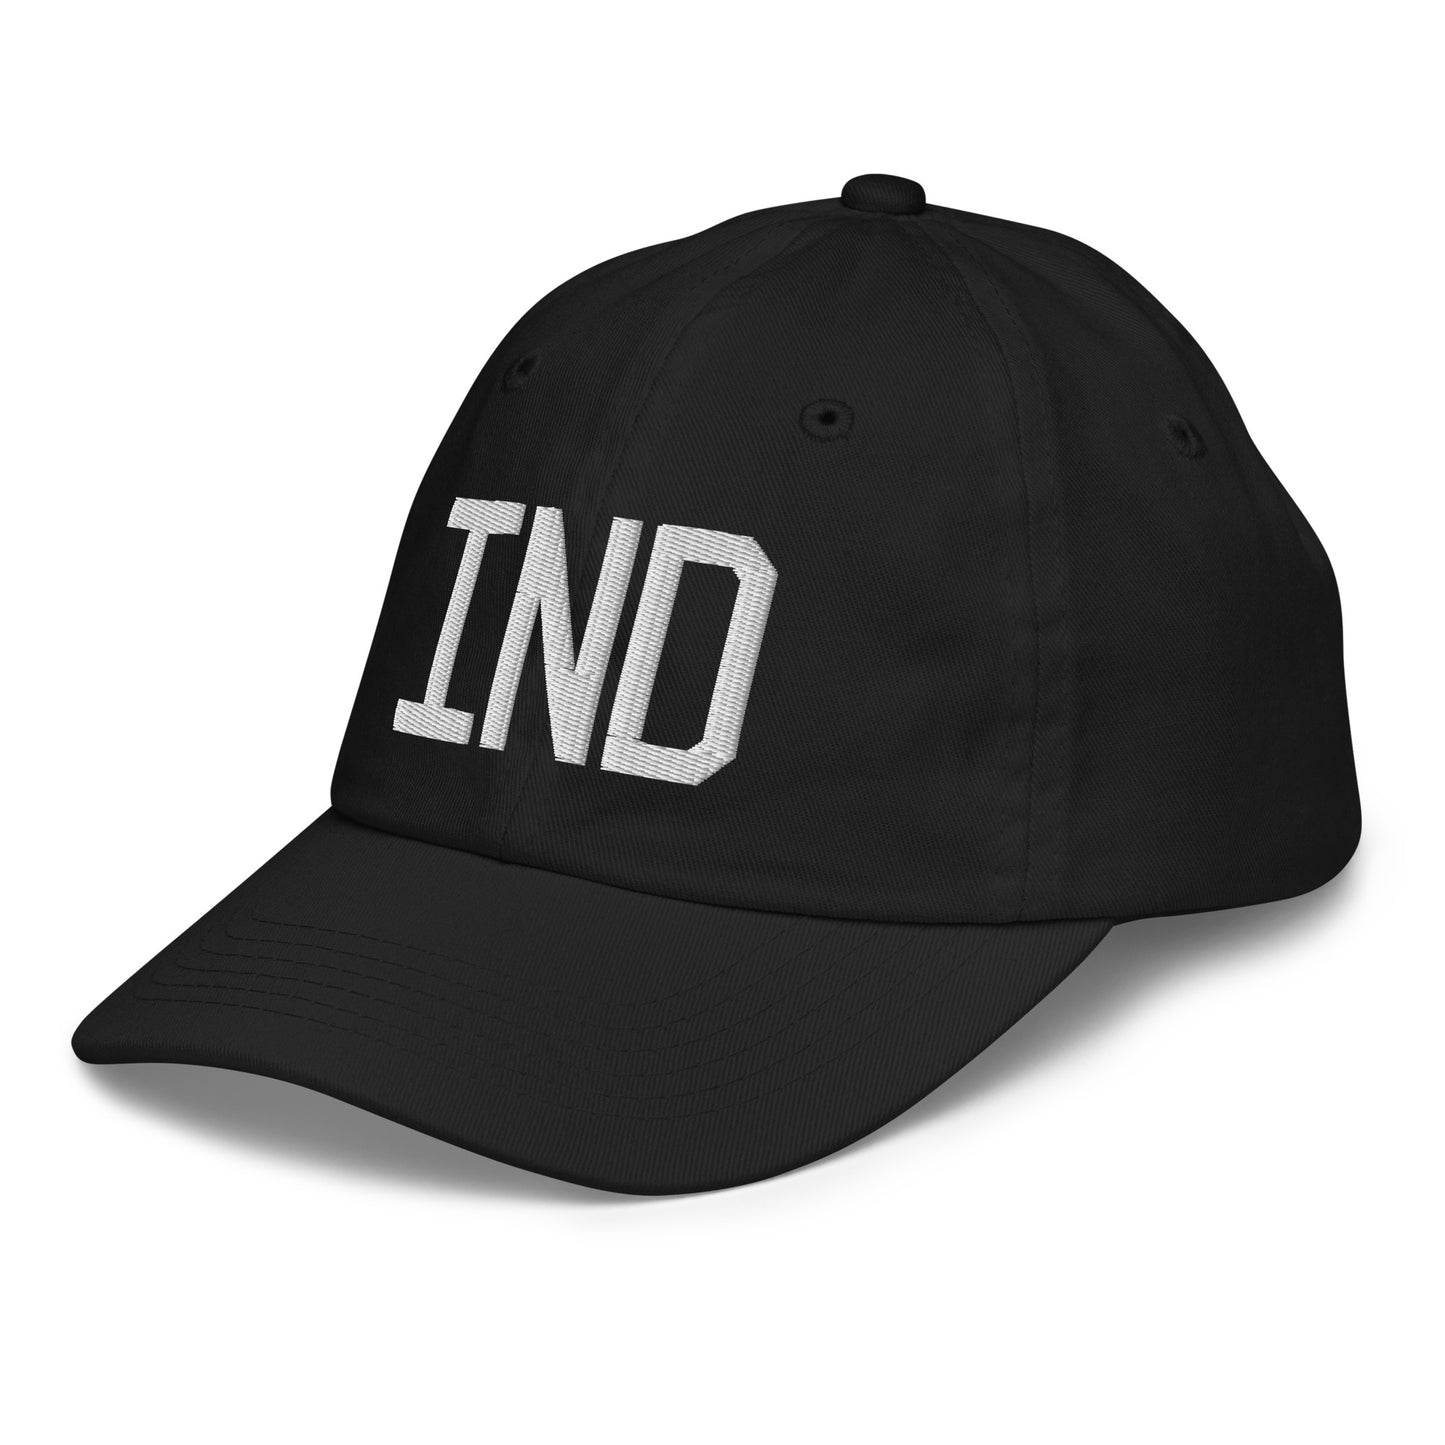 Airport Code Kid's Baseball Cap - White • IND Indianapolis • YHM Designs - Image 13